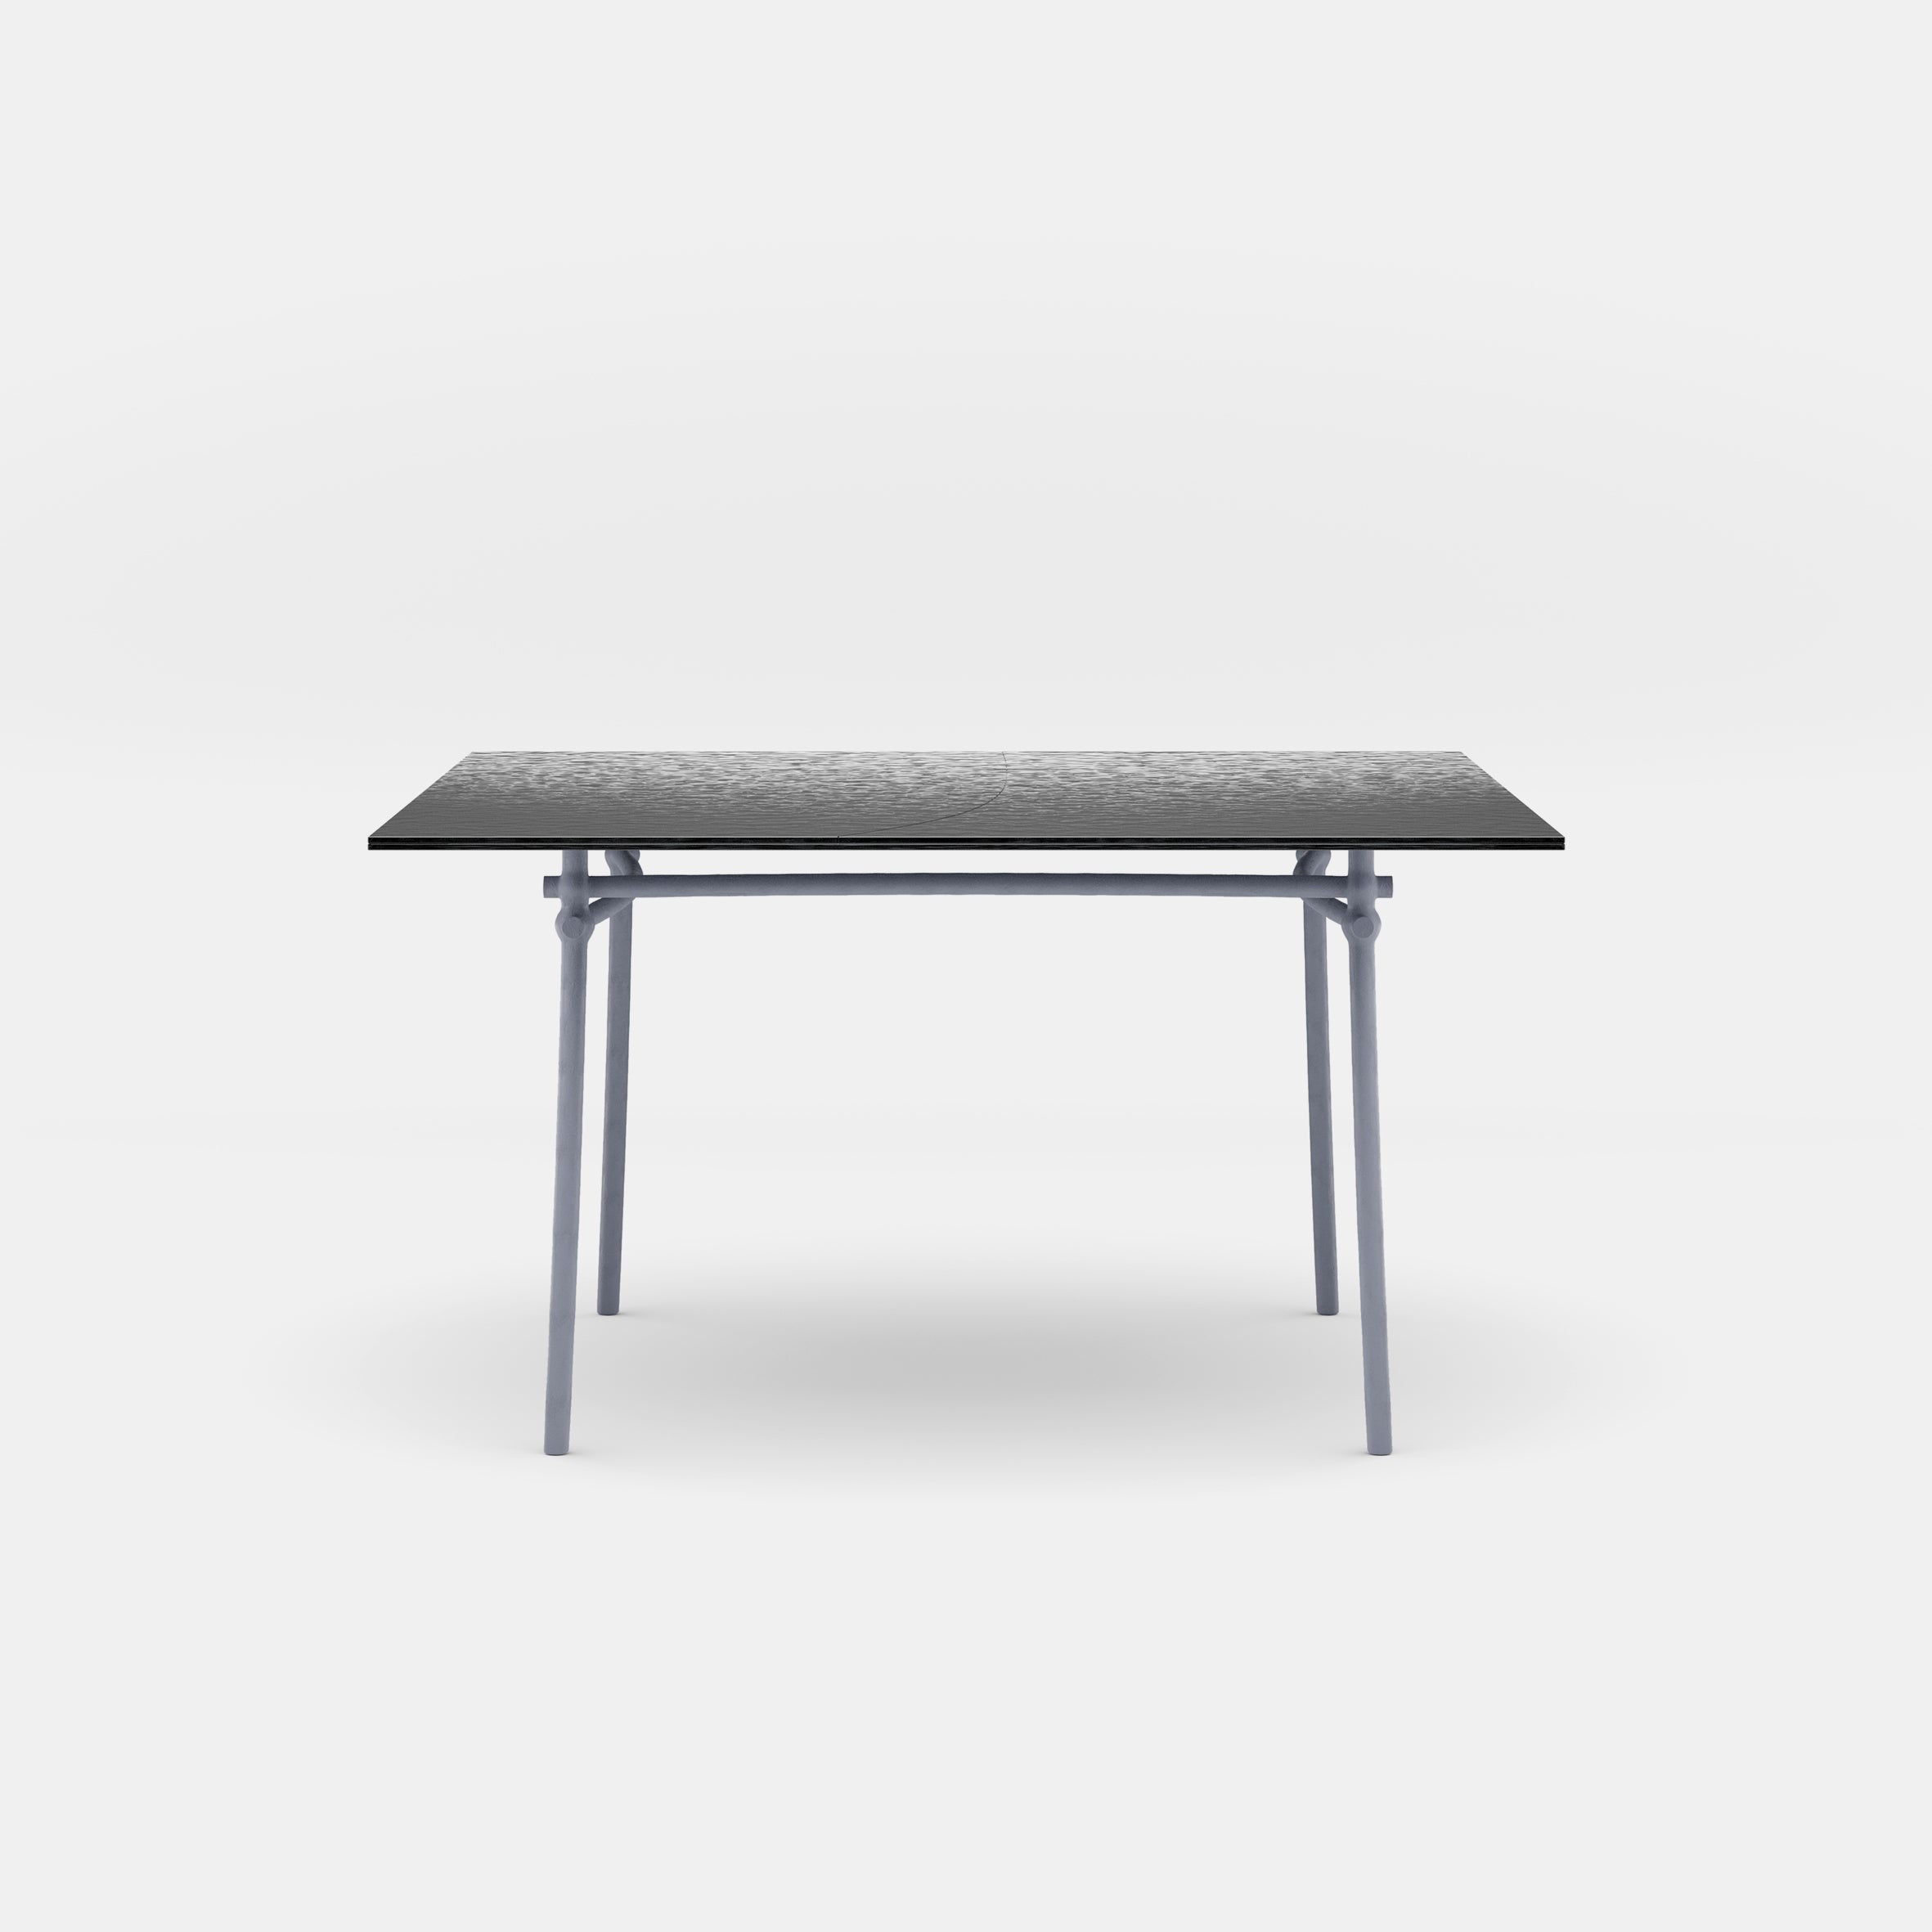 Bambusae Outdoor Table - Square